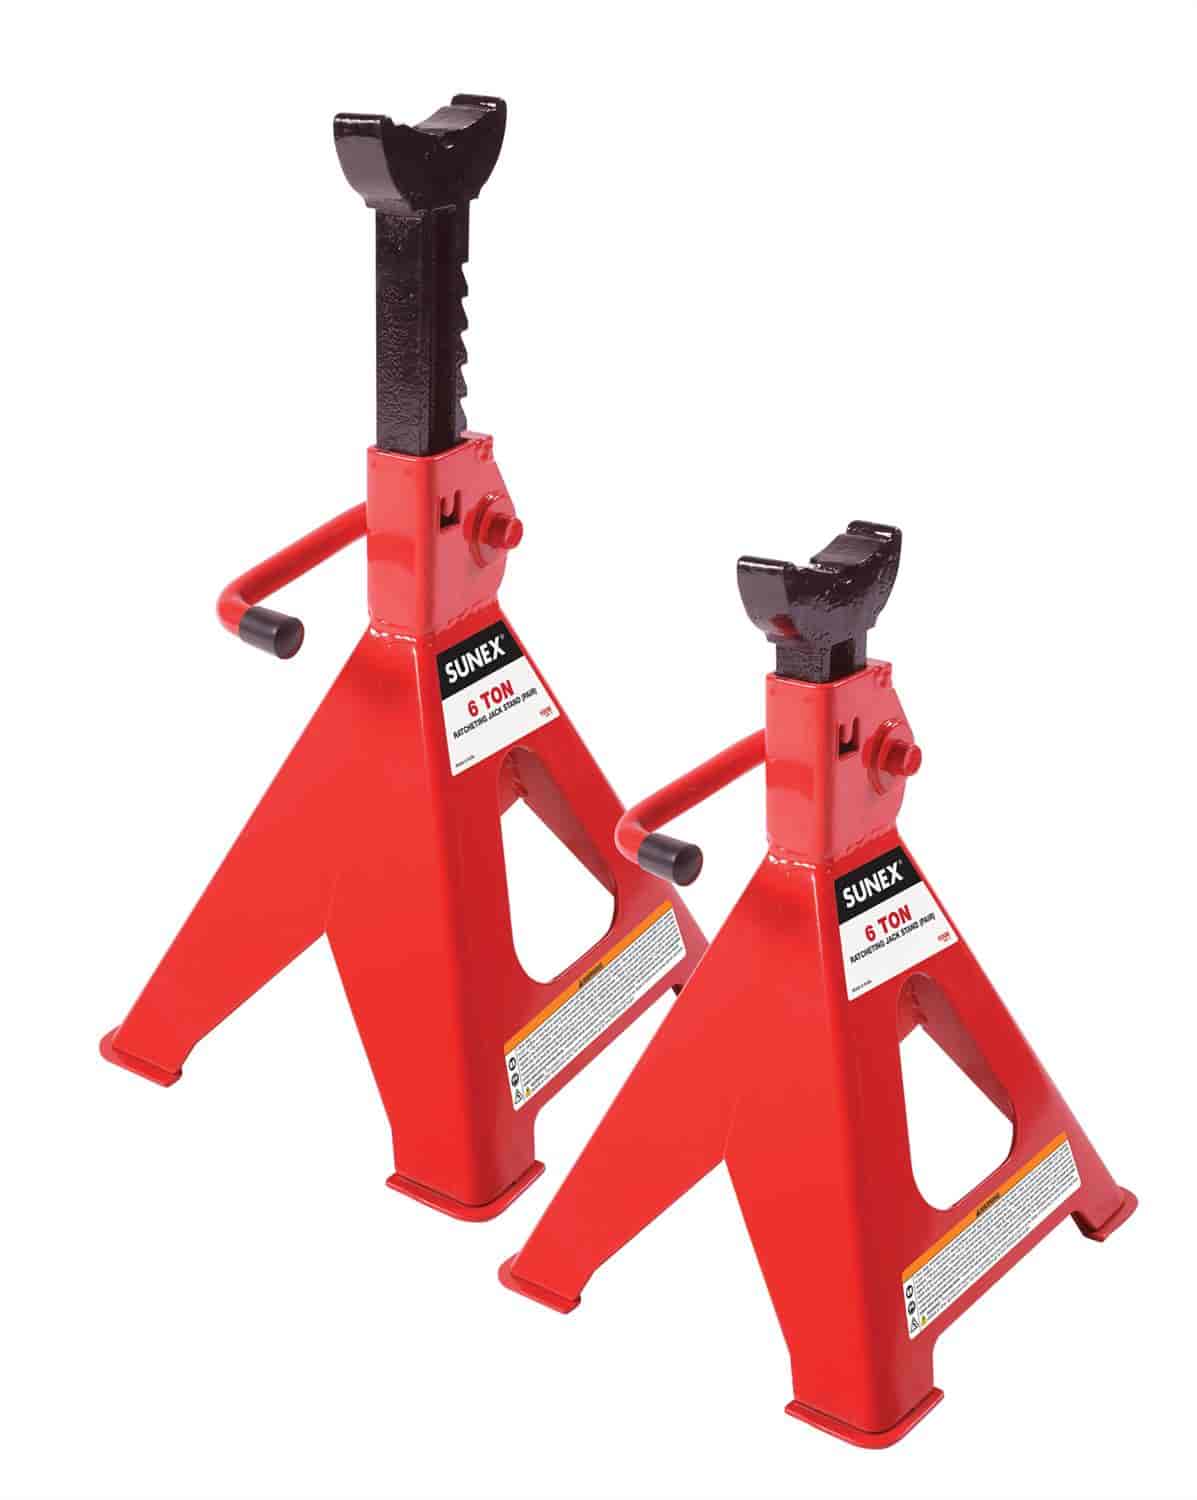 6-Ton Jack Stands